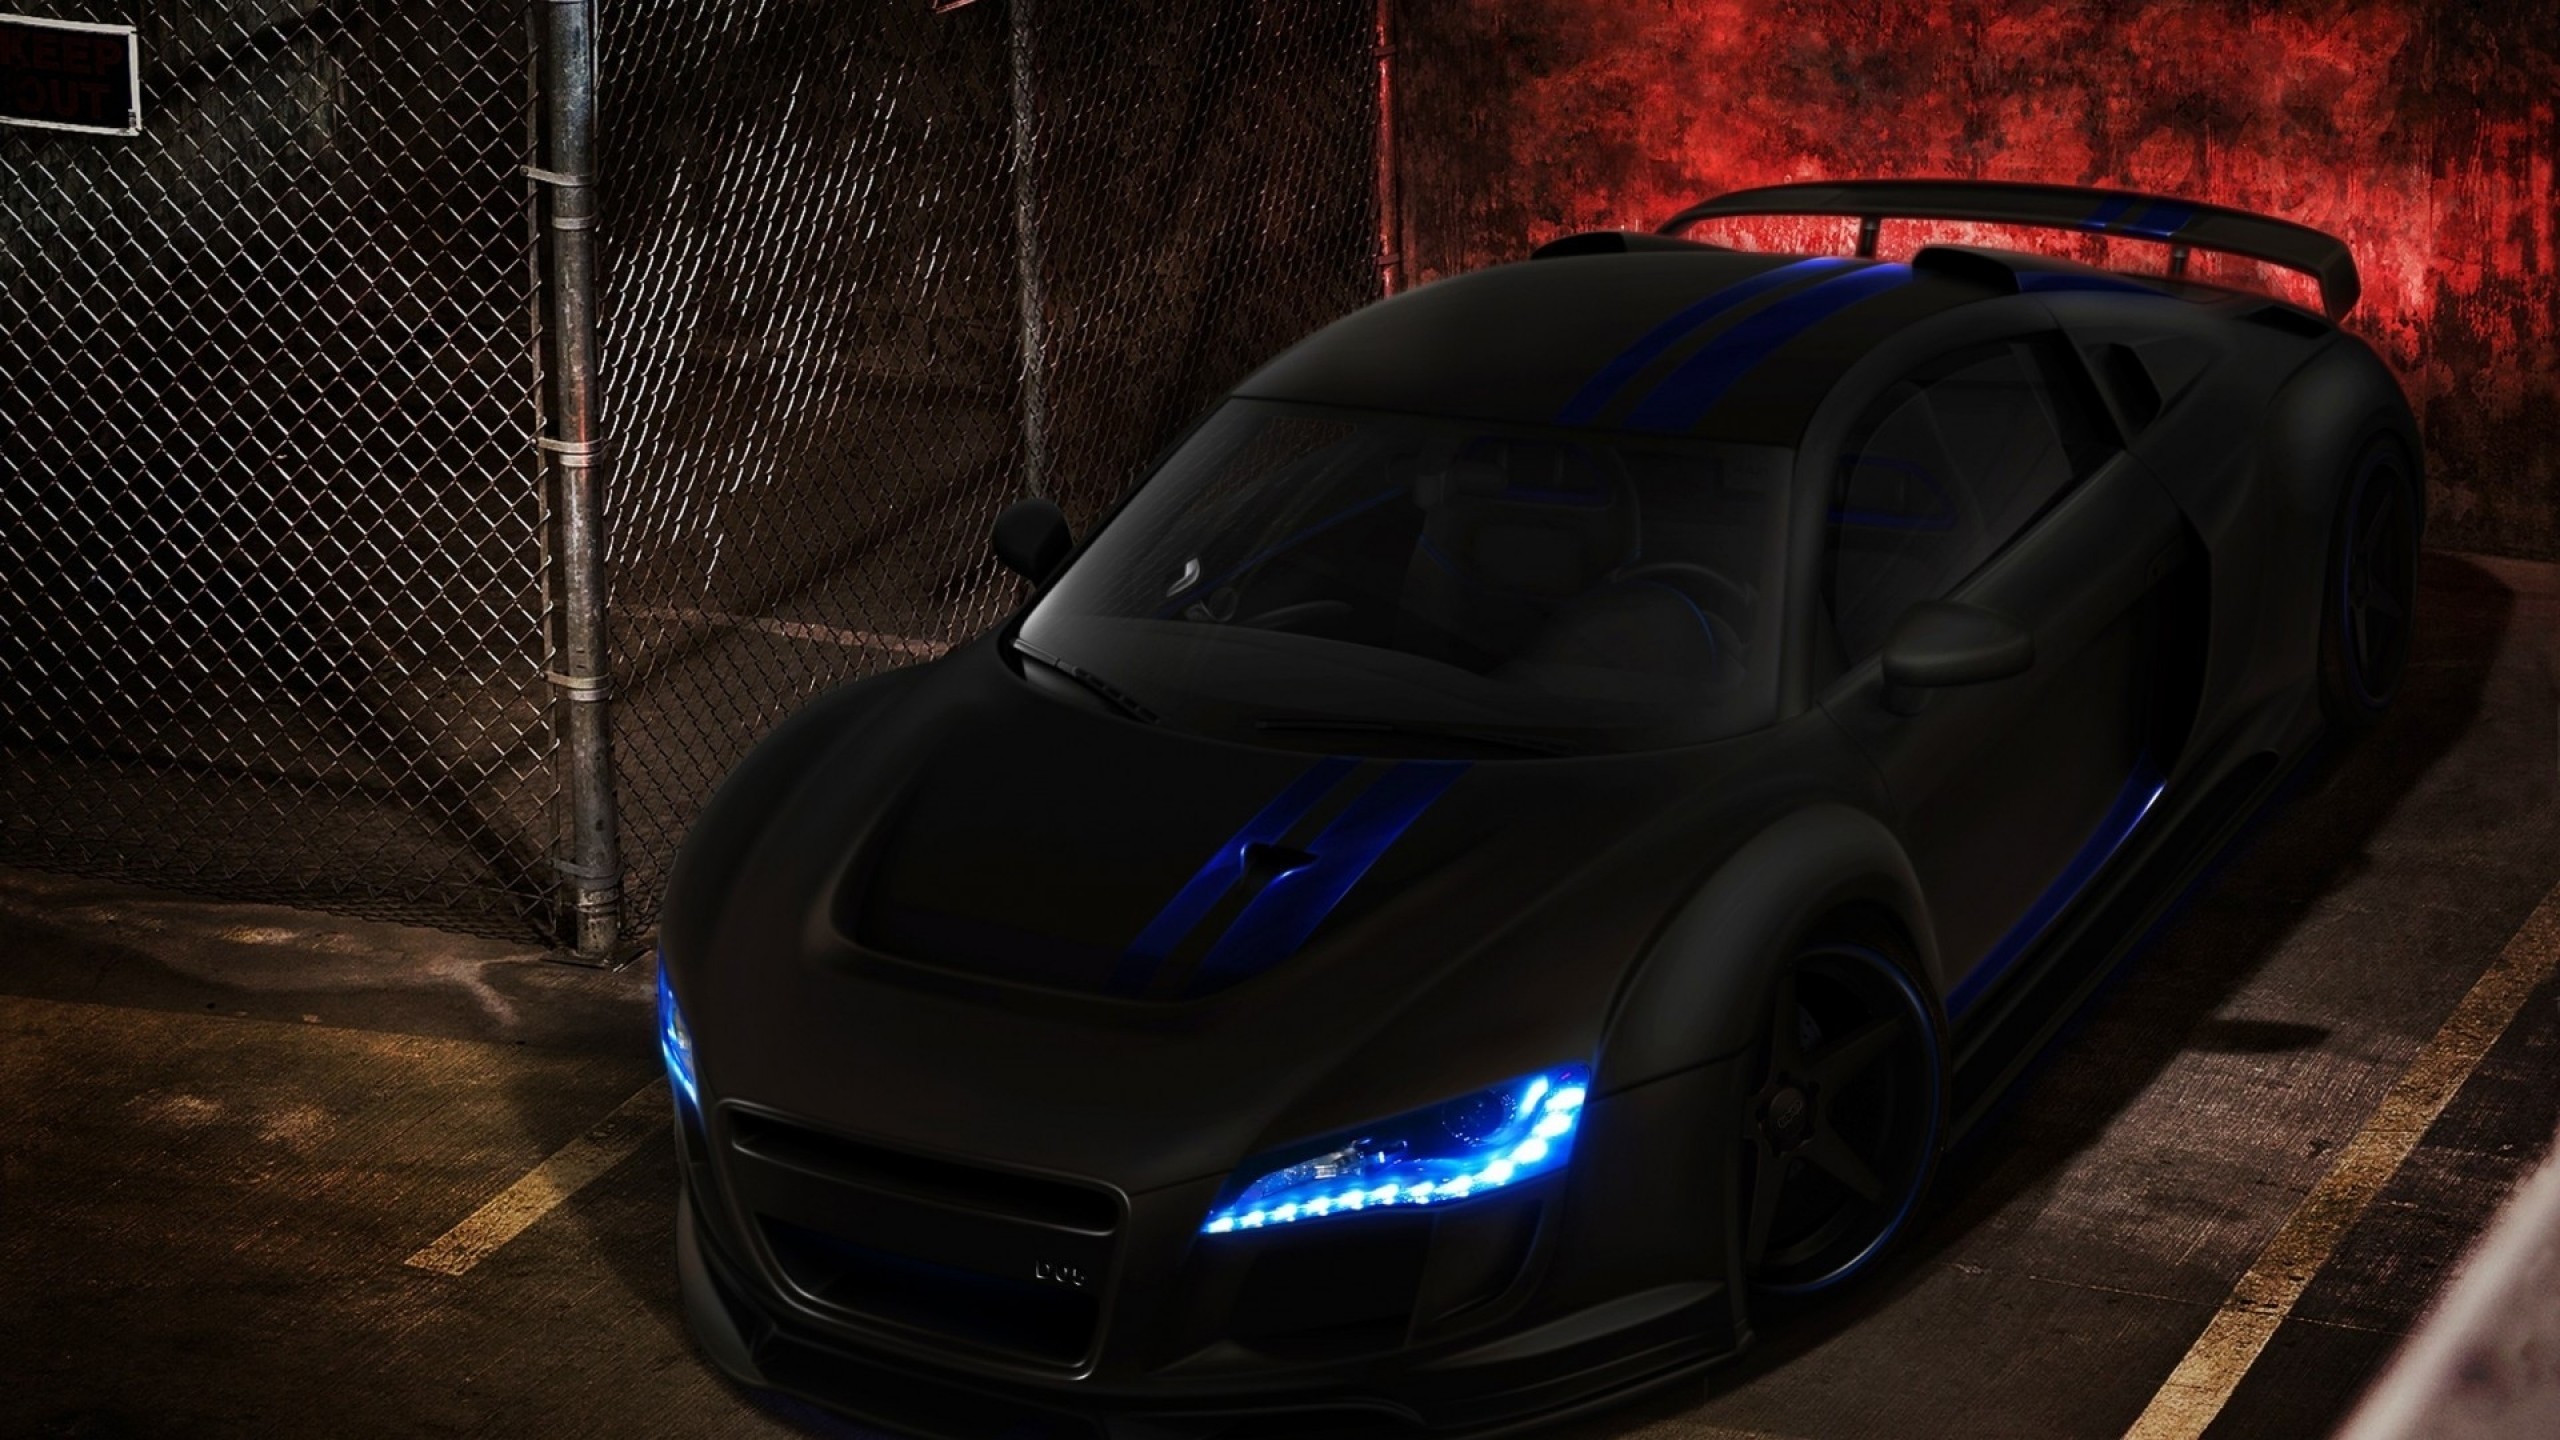 2560x1440 Audia R8 in matte black with cool lights #audi #r8 #wallpapers  www.yours-cars.eu | Rides | Pinterest